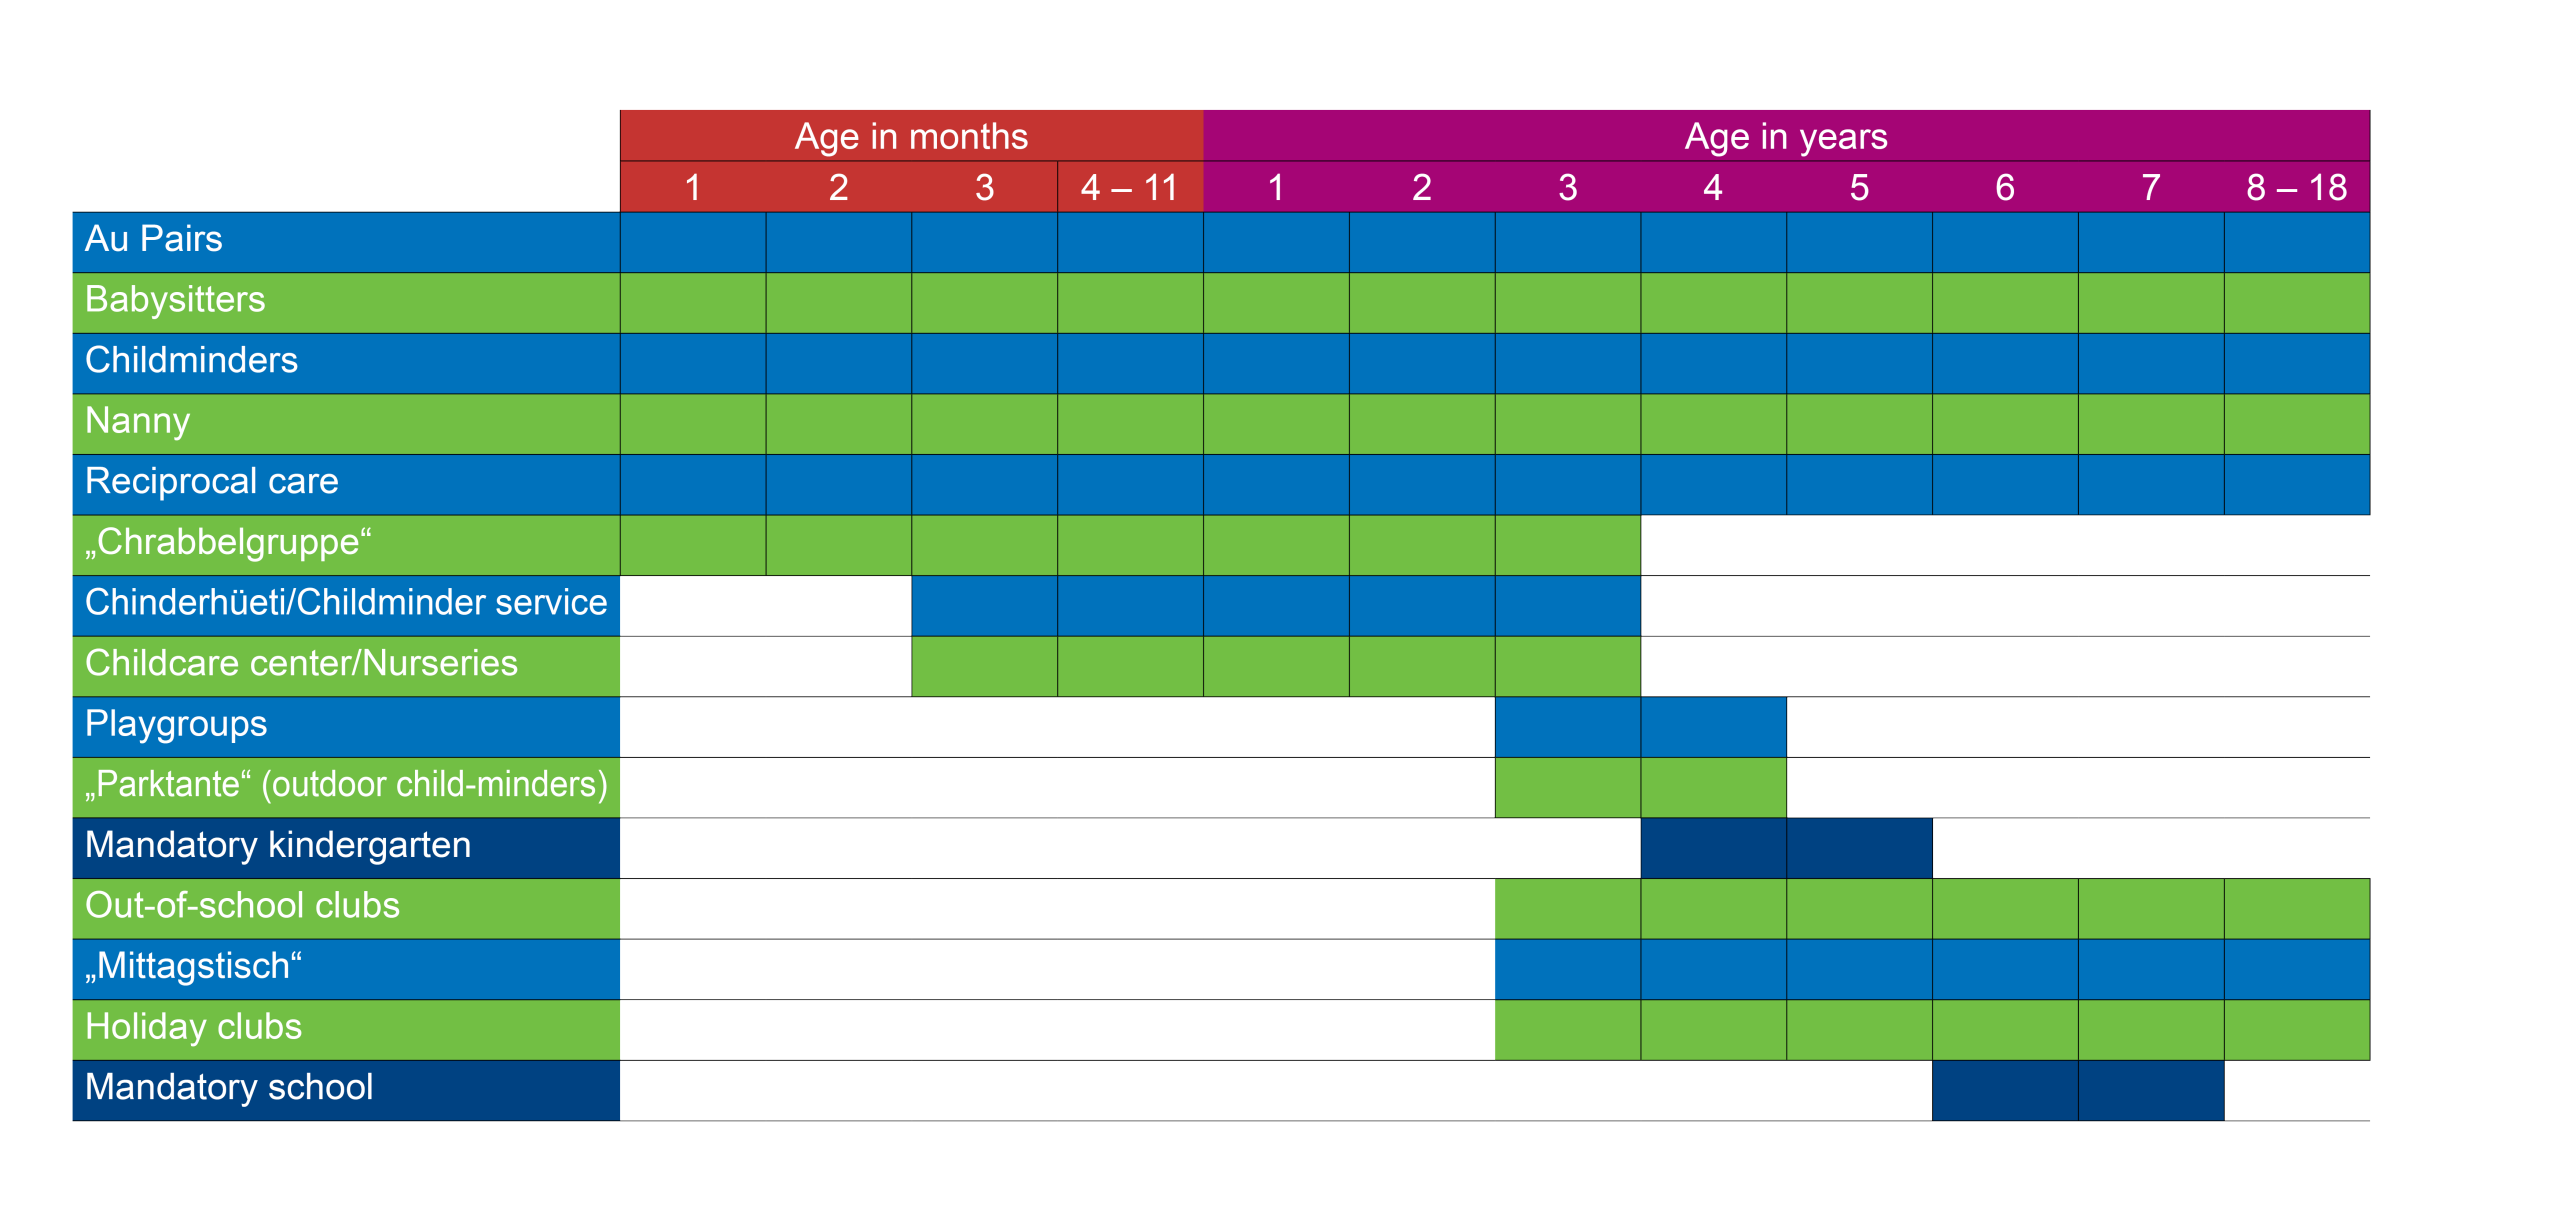 Enlarged view: Childcare by age group